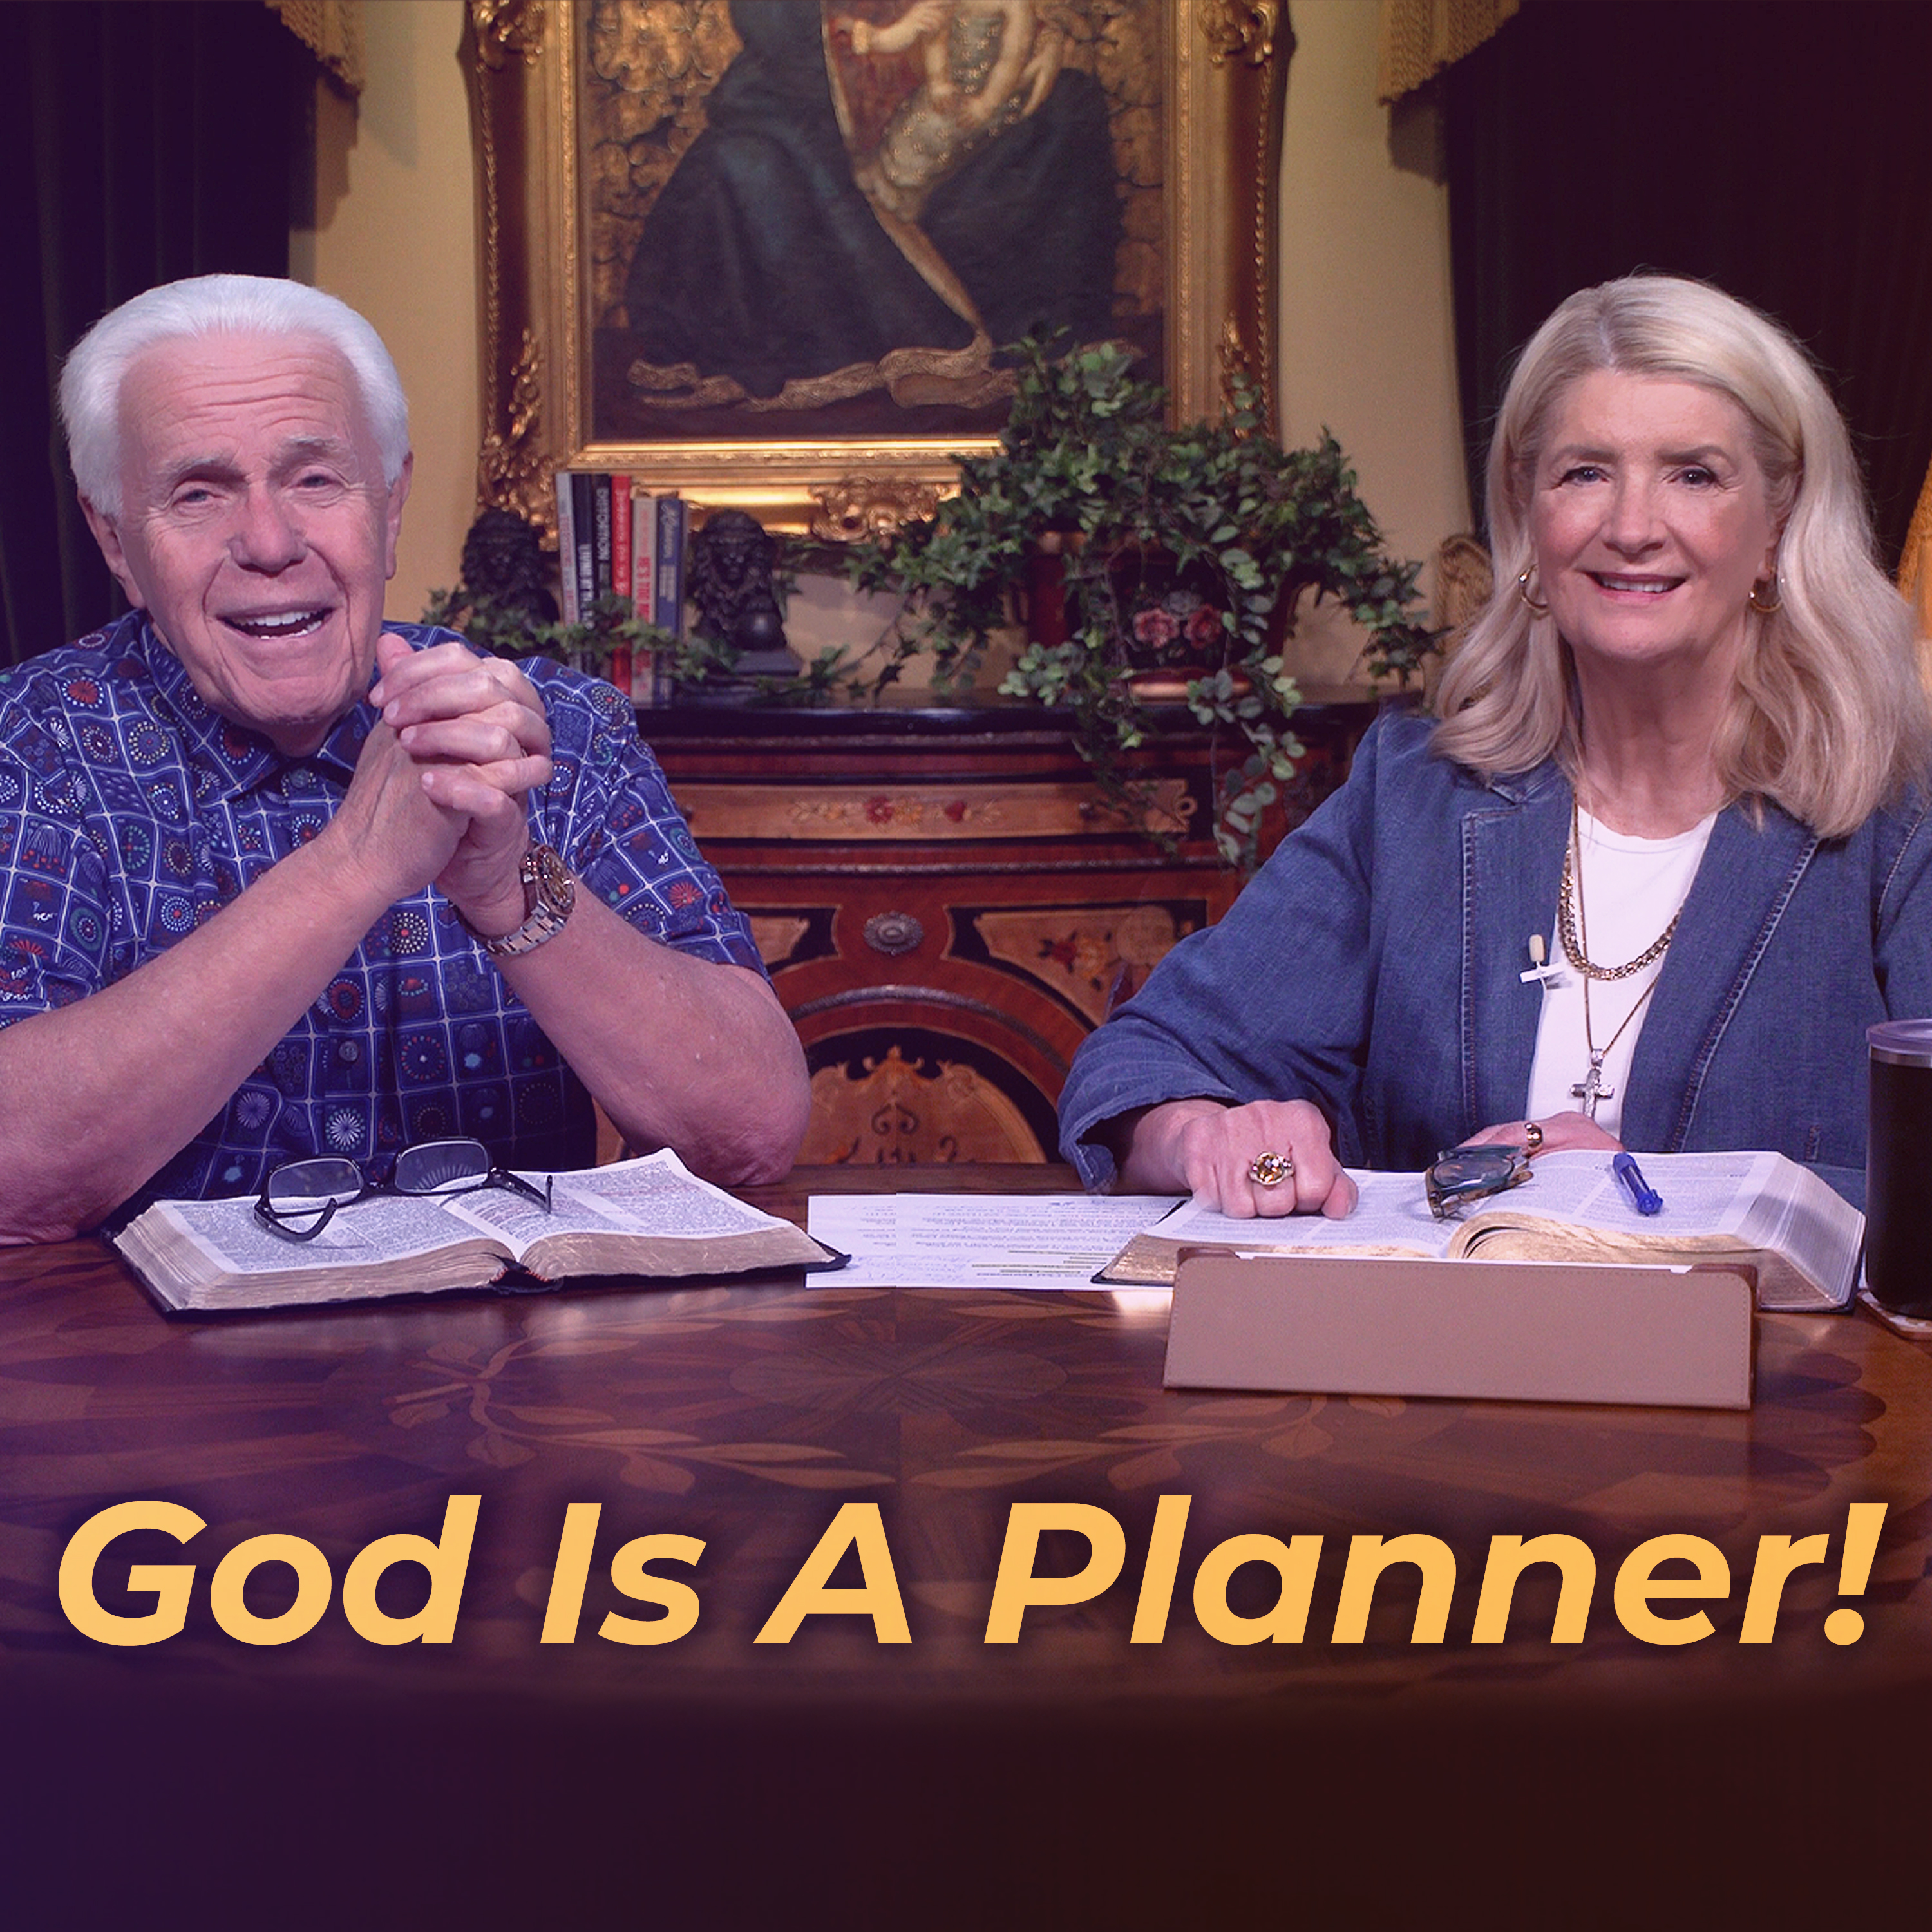 God Is A Planner!